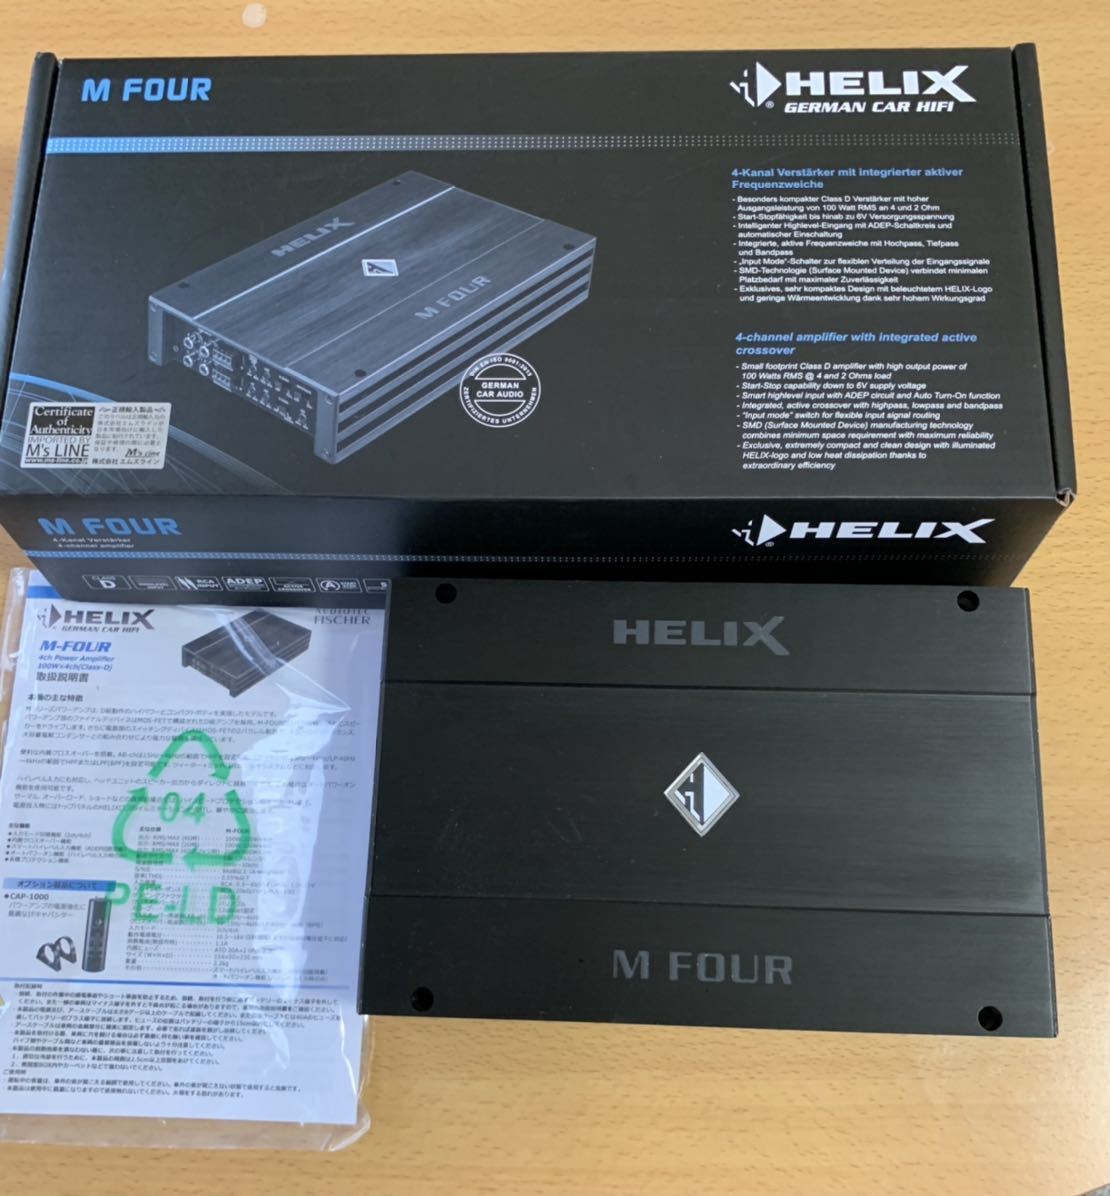 HELIX 4chパワーアンプ M-FOUR M's Line正規品 ヘリックス ...